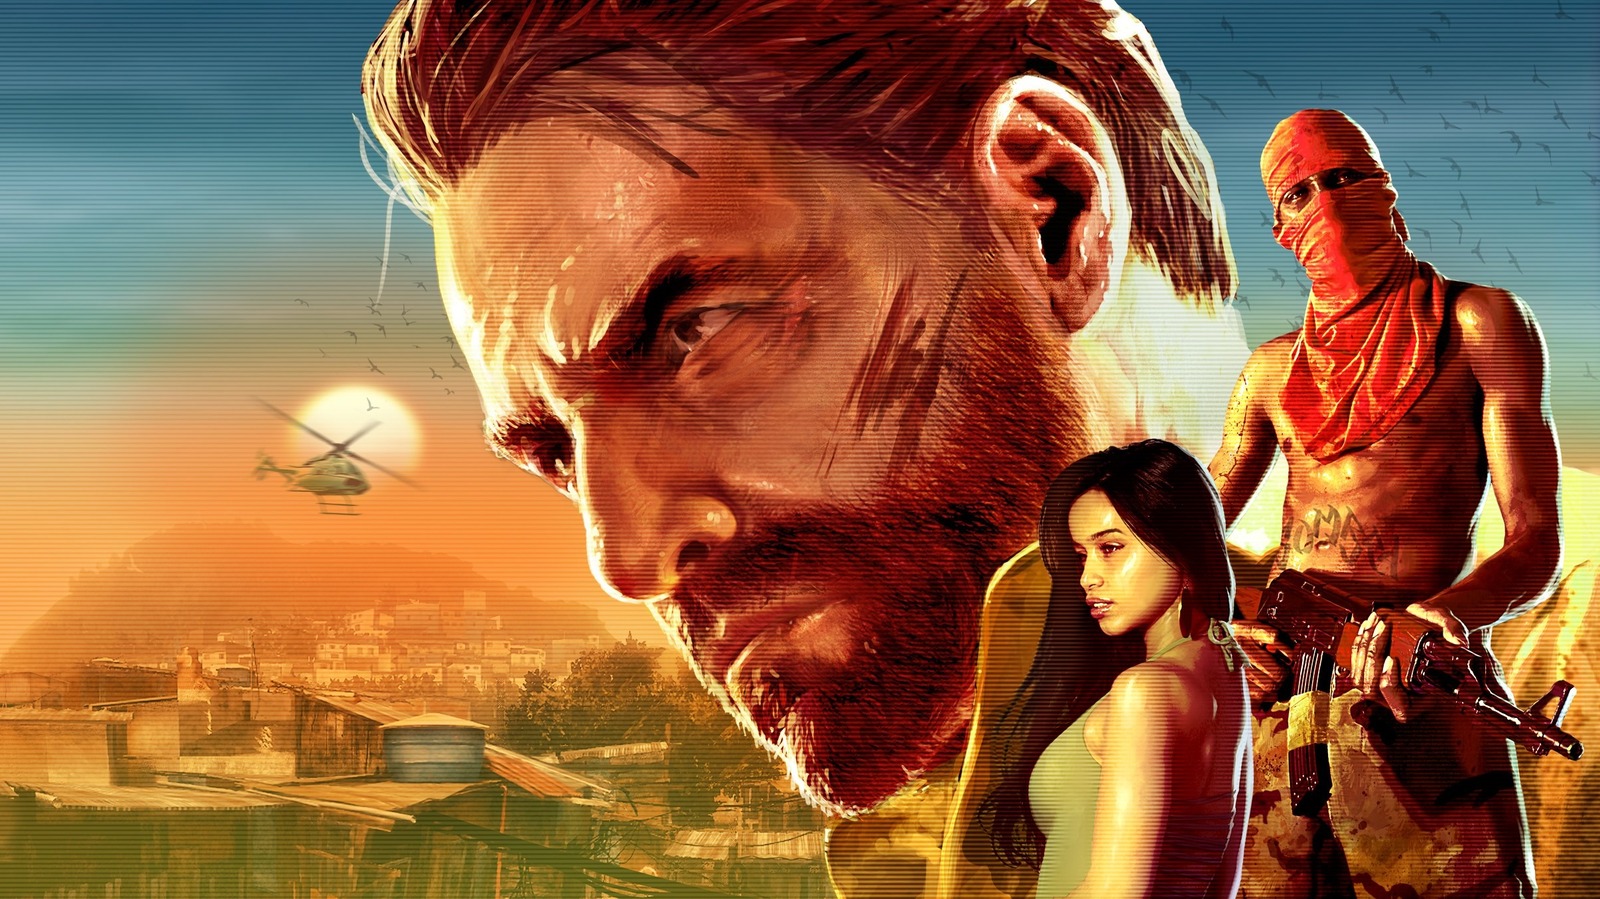 Max Payne 4: When Will We Get A Sequel?